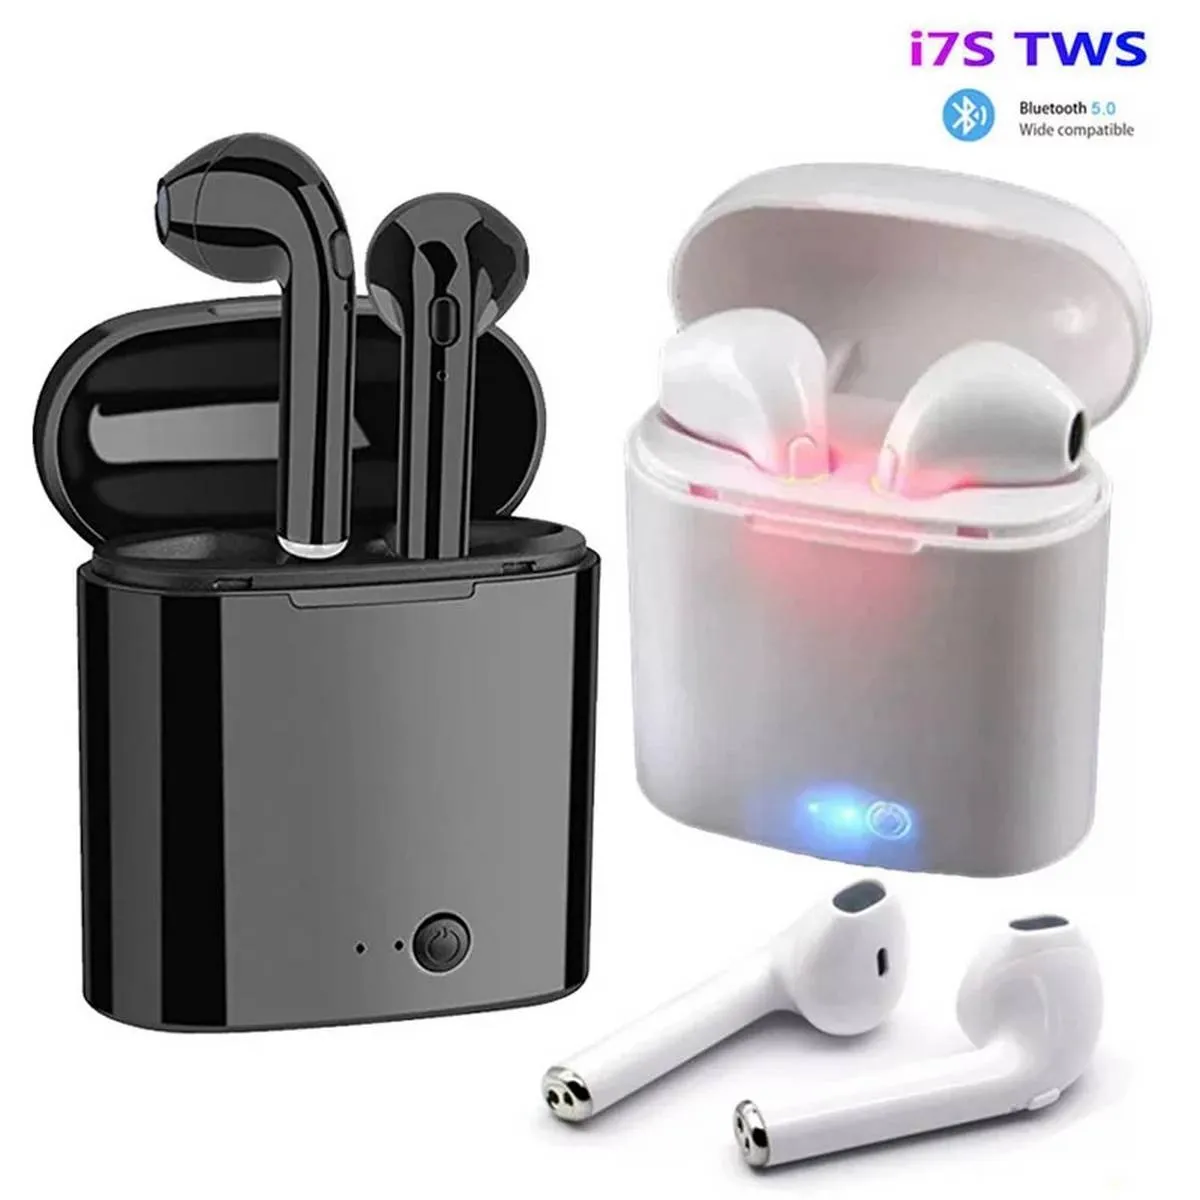 Buy i17 s Airpods at best price in Pakistan | Rhizmall.pk 